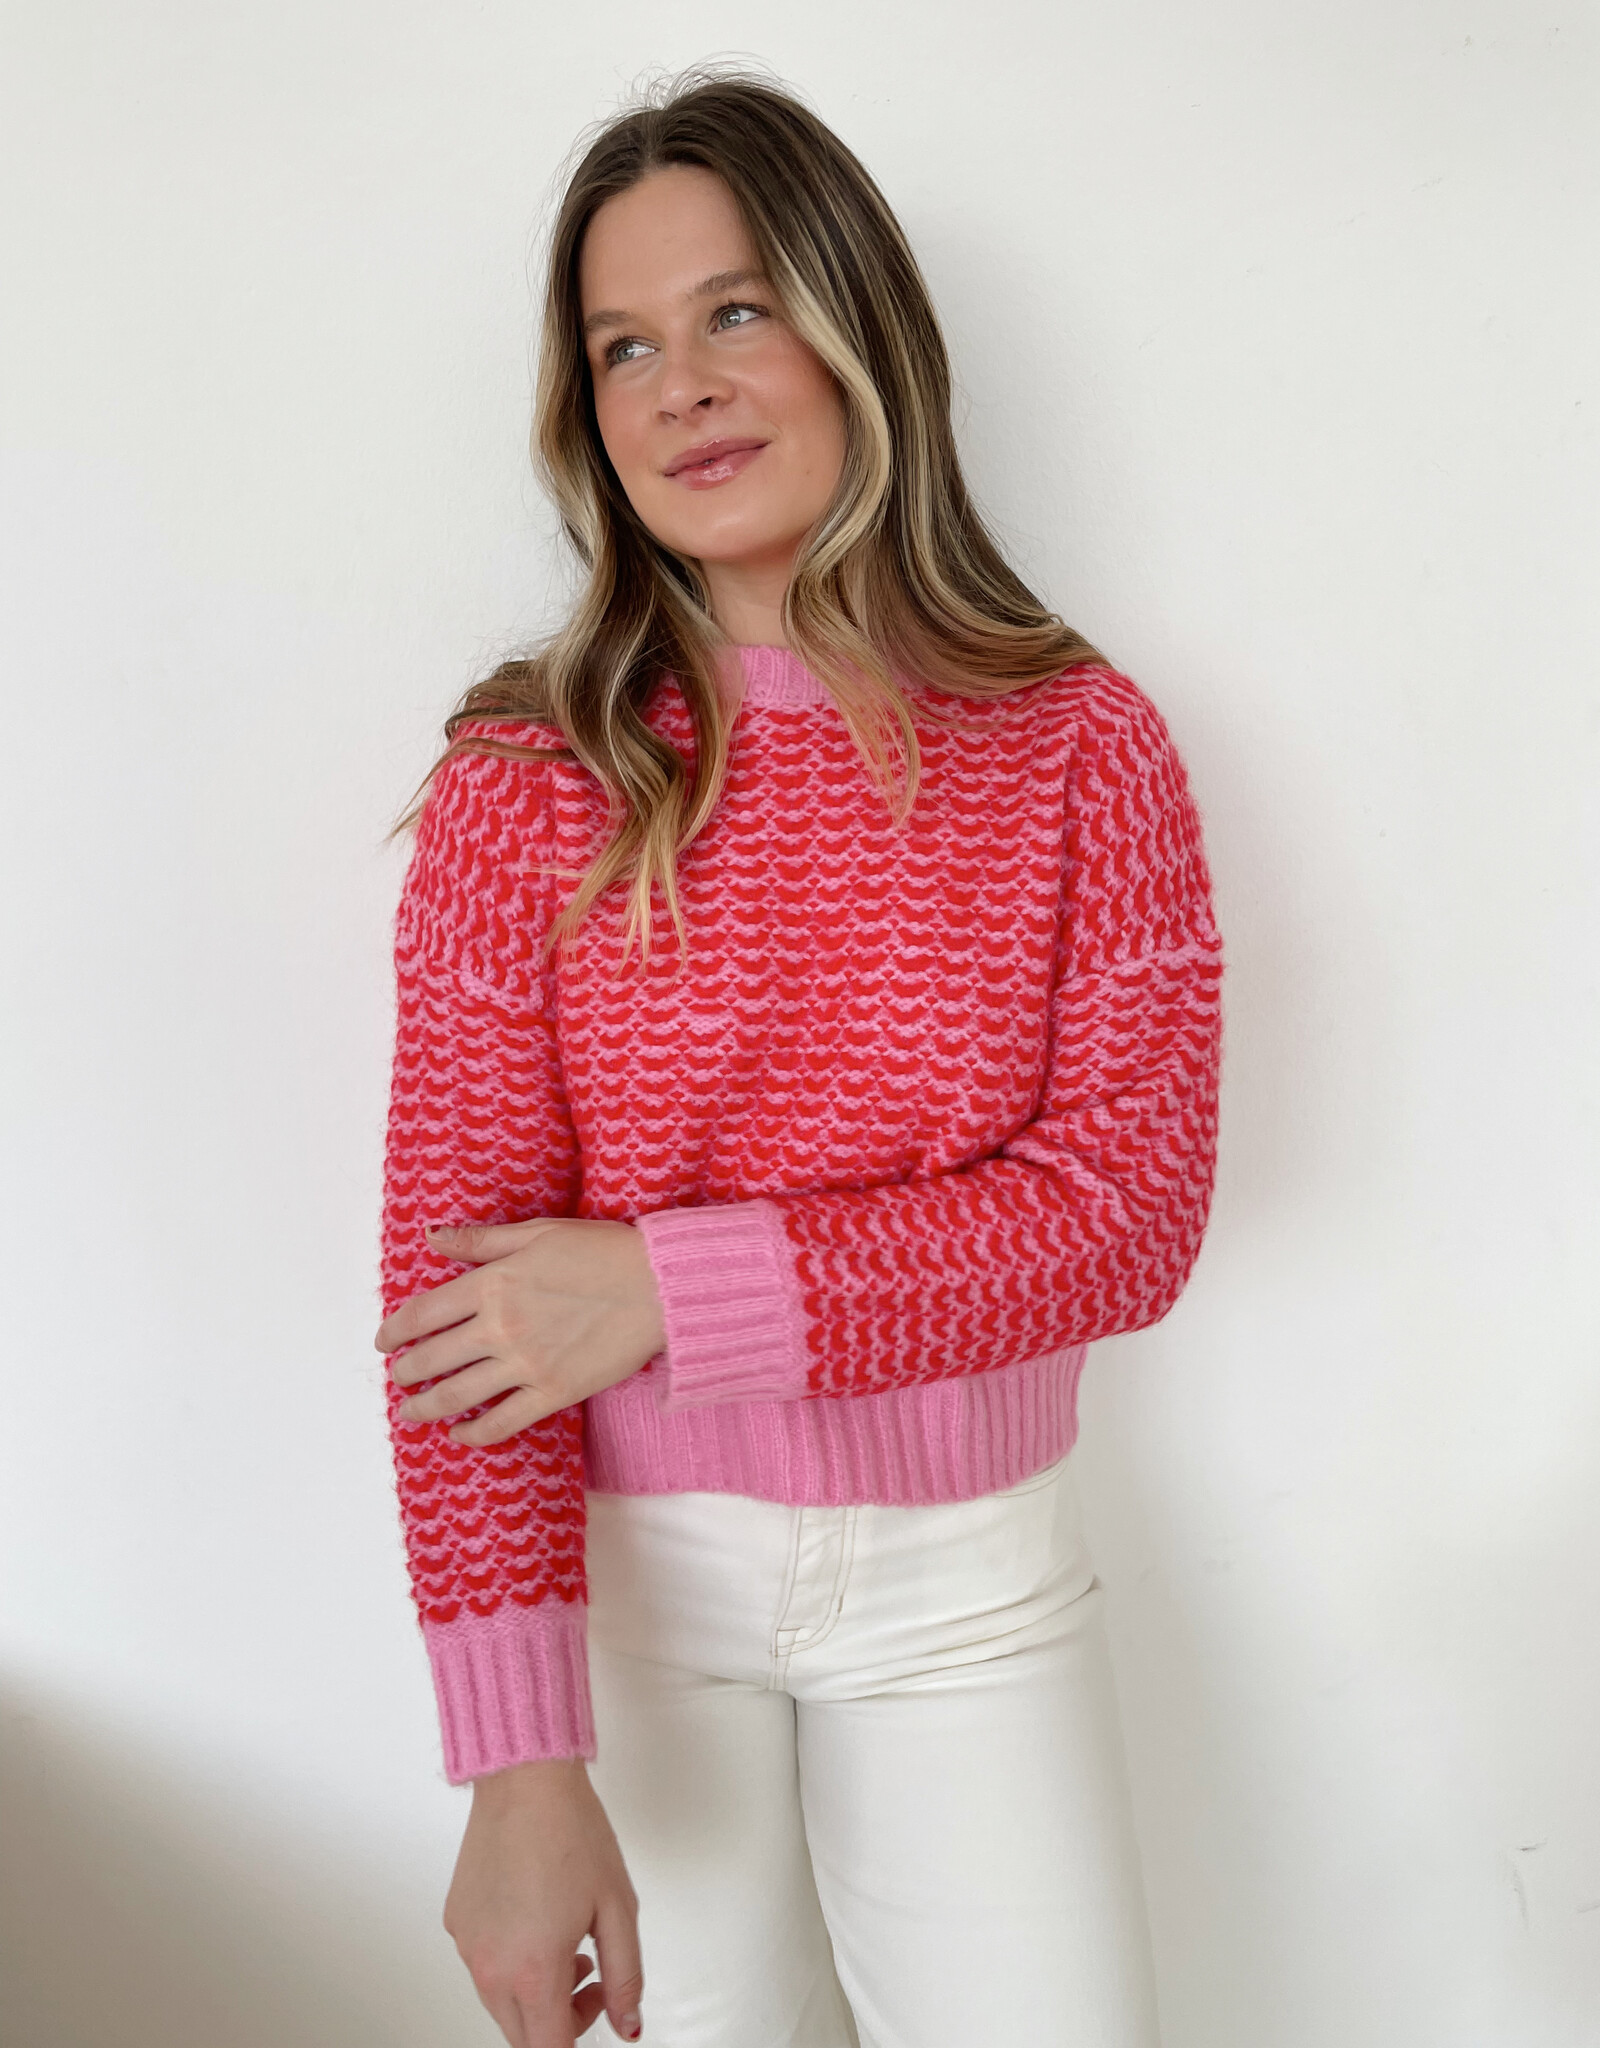 Coco Pink Contrast Knit Sweater